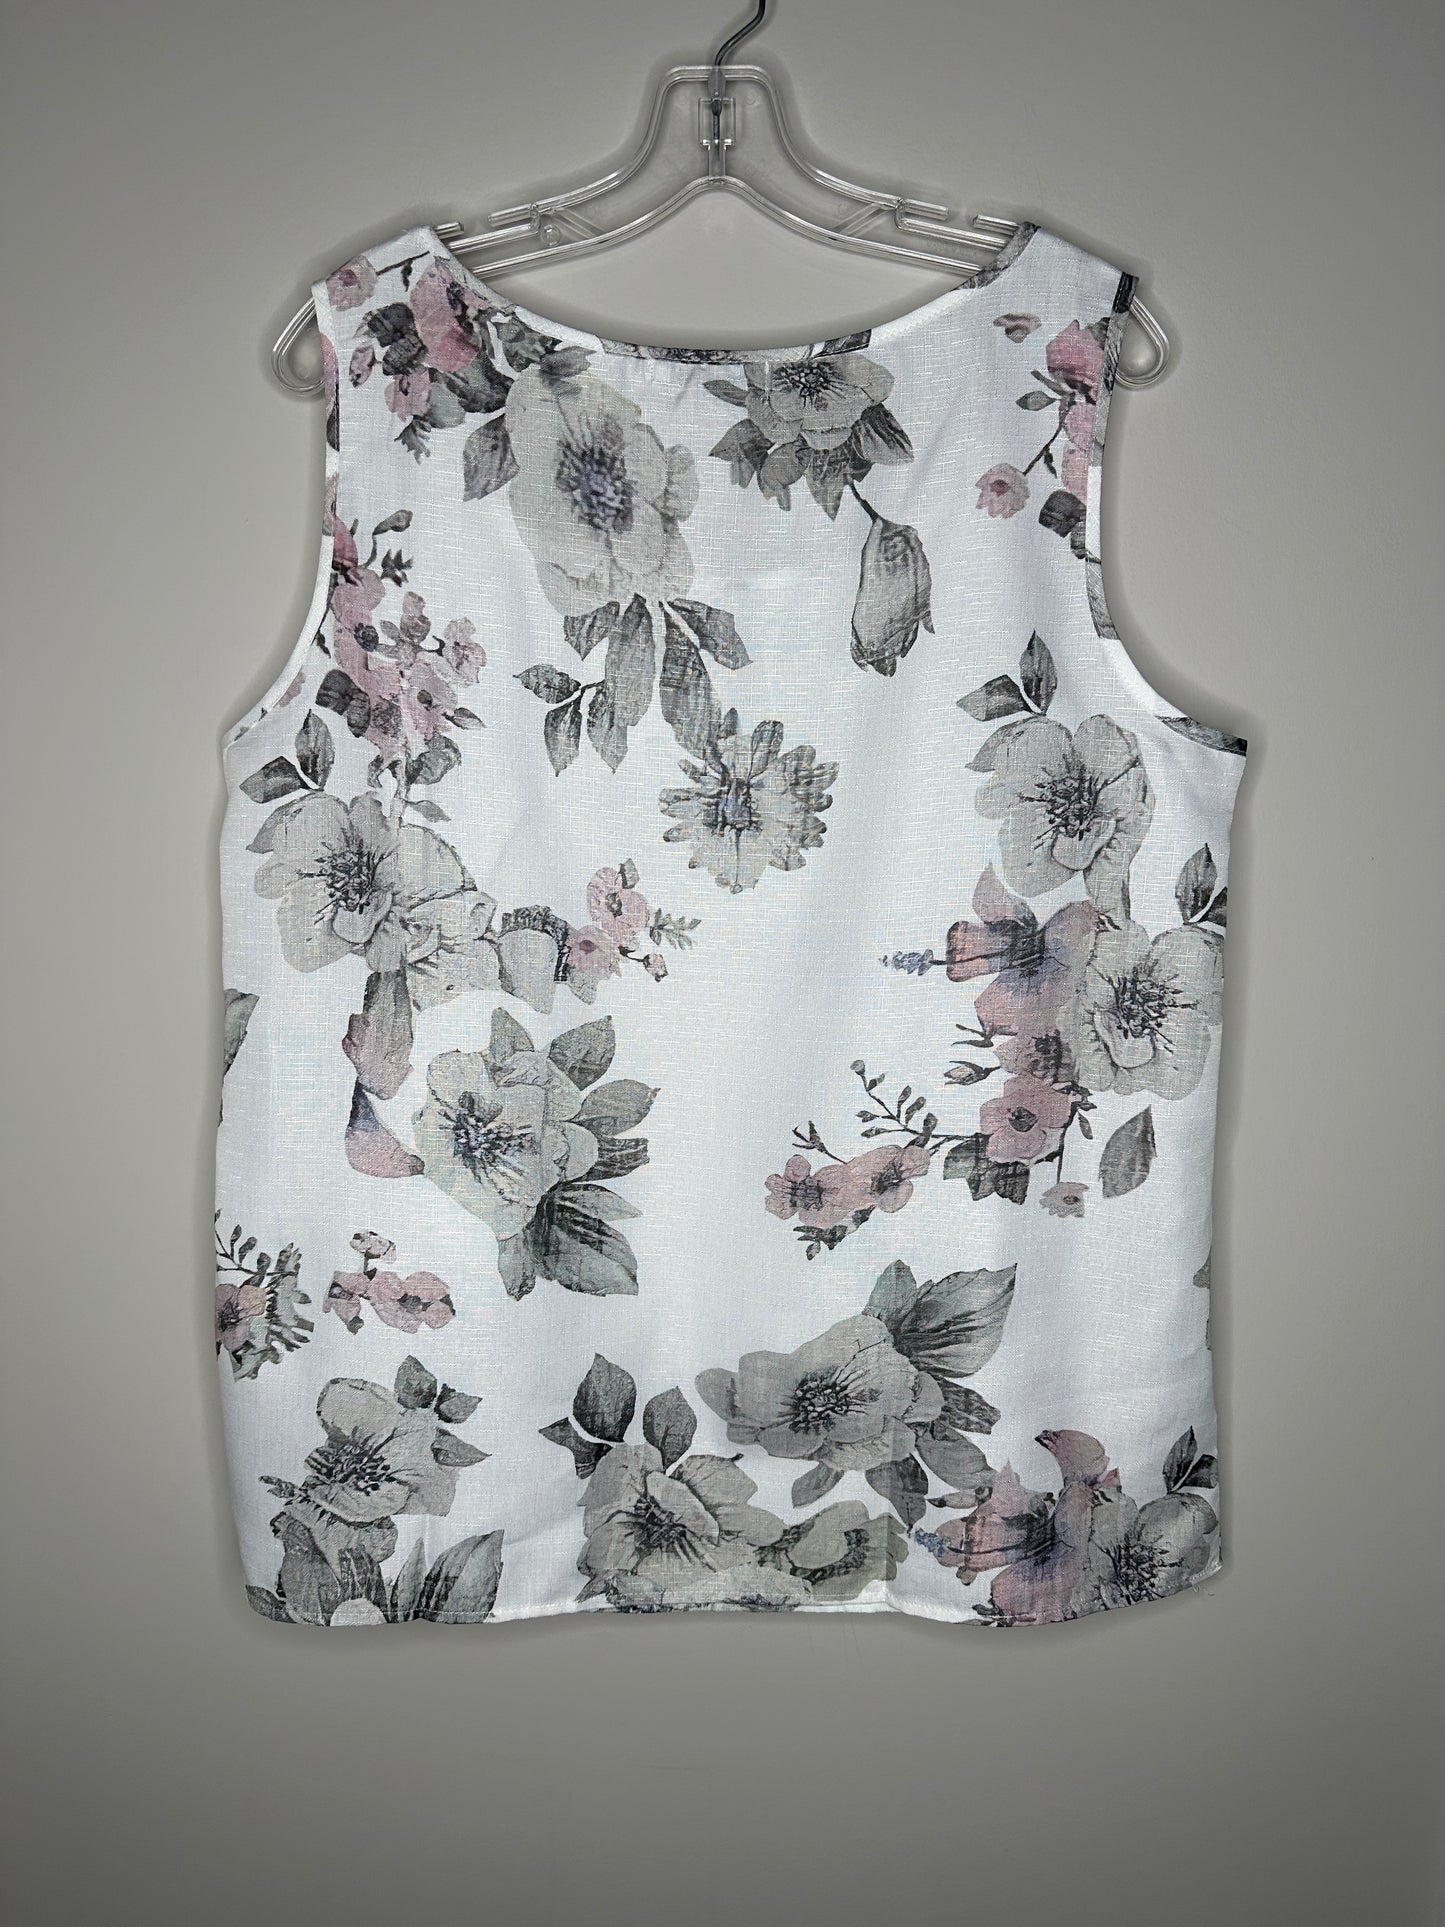 Misslook Size XL White w/Gray & Lavender Floral Sleeveless Top, new/NWOT